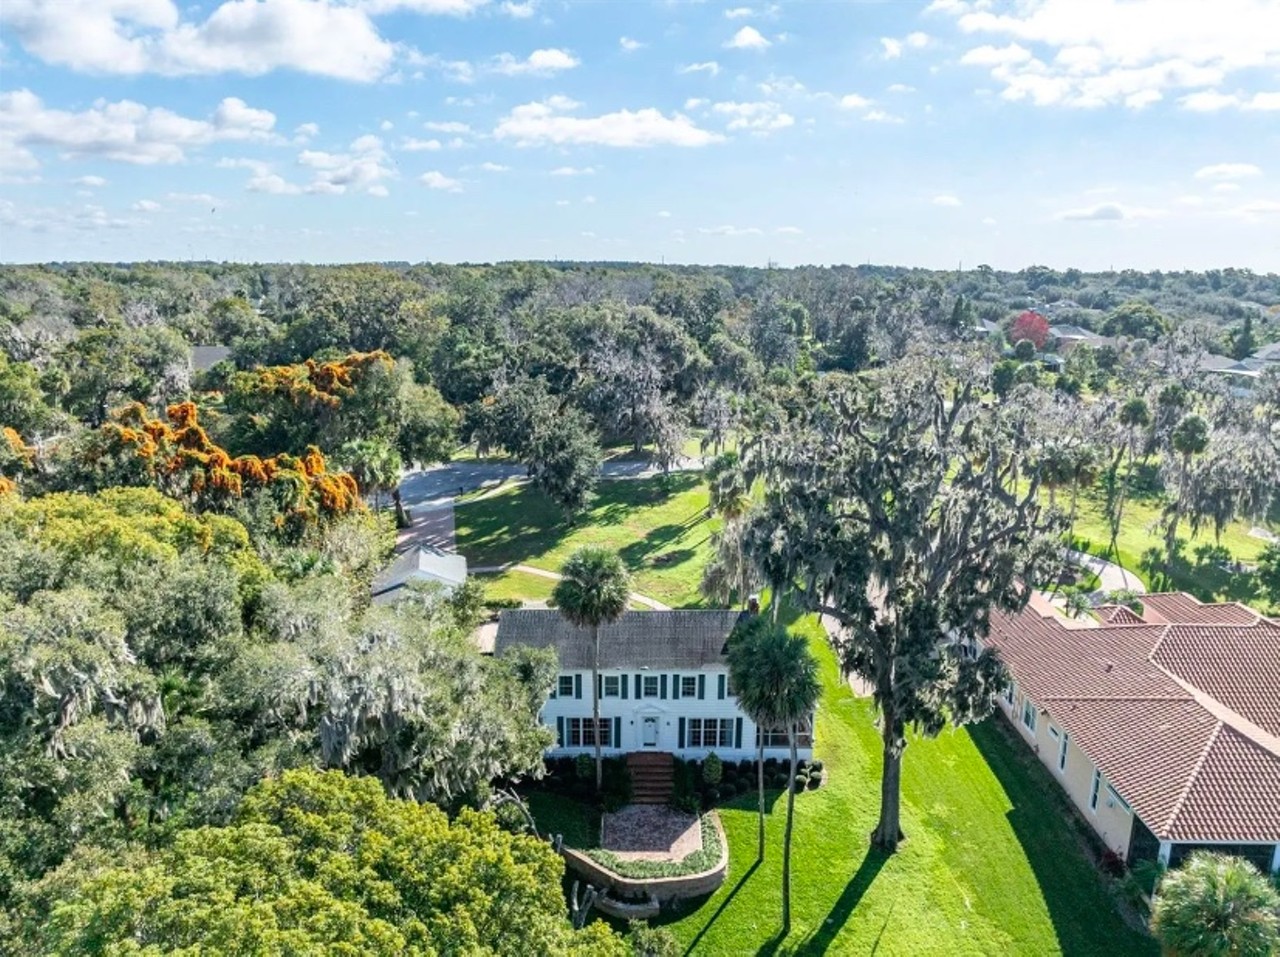 The historic 'Gwathmey House' built by James Gamble Rogers II for a citrus tycoon is for sale in Orlando area